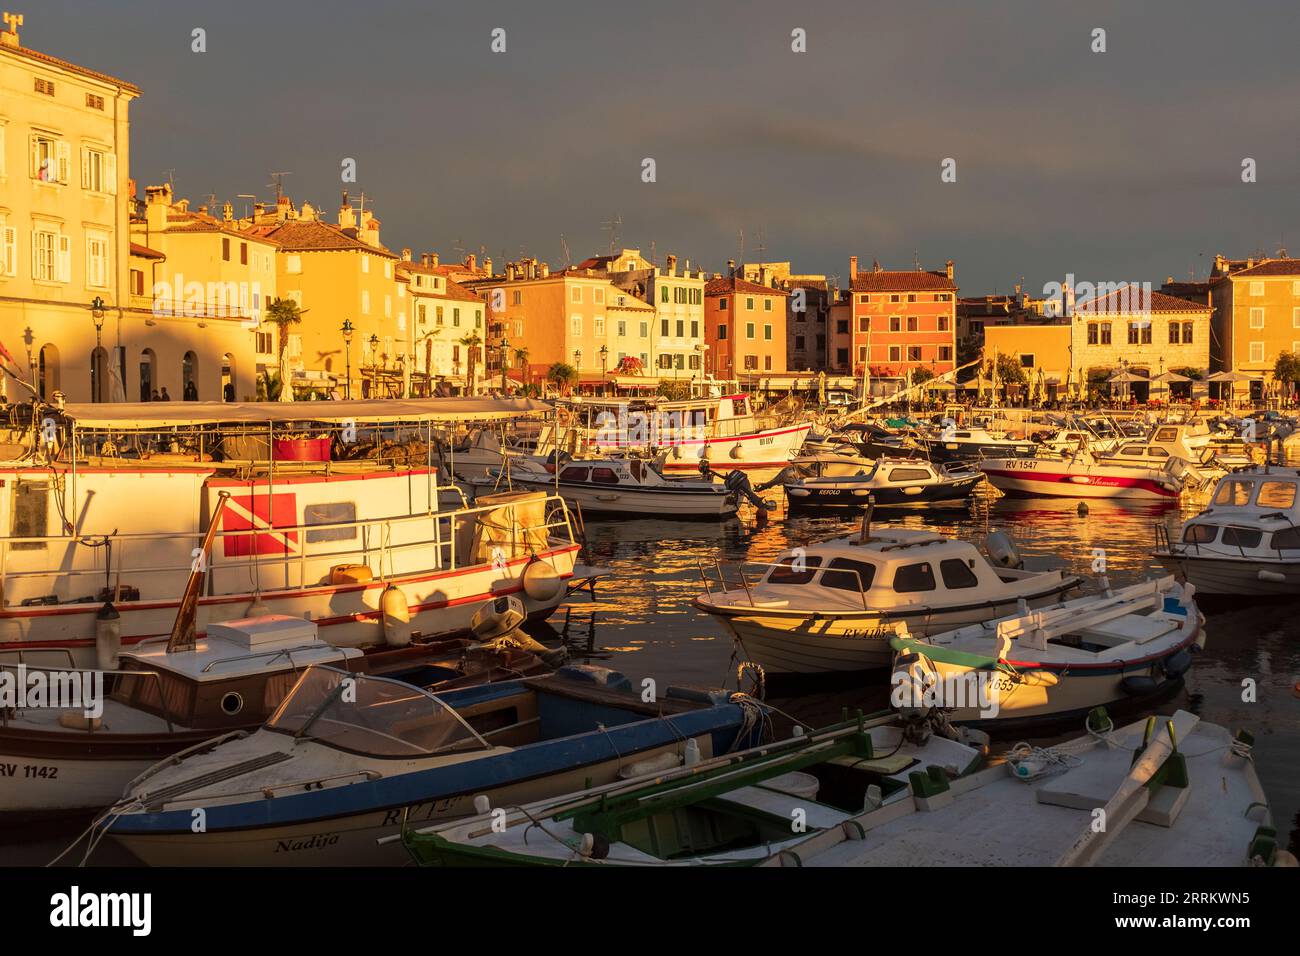 View of small marina in the center of Rovinj, Croatia, at the sunset Stock Photo